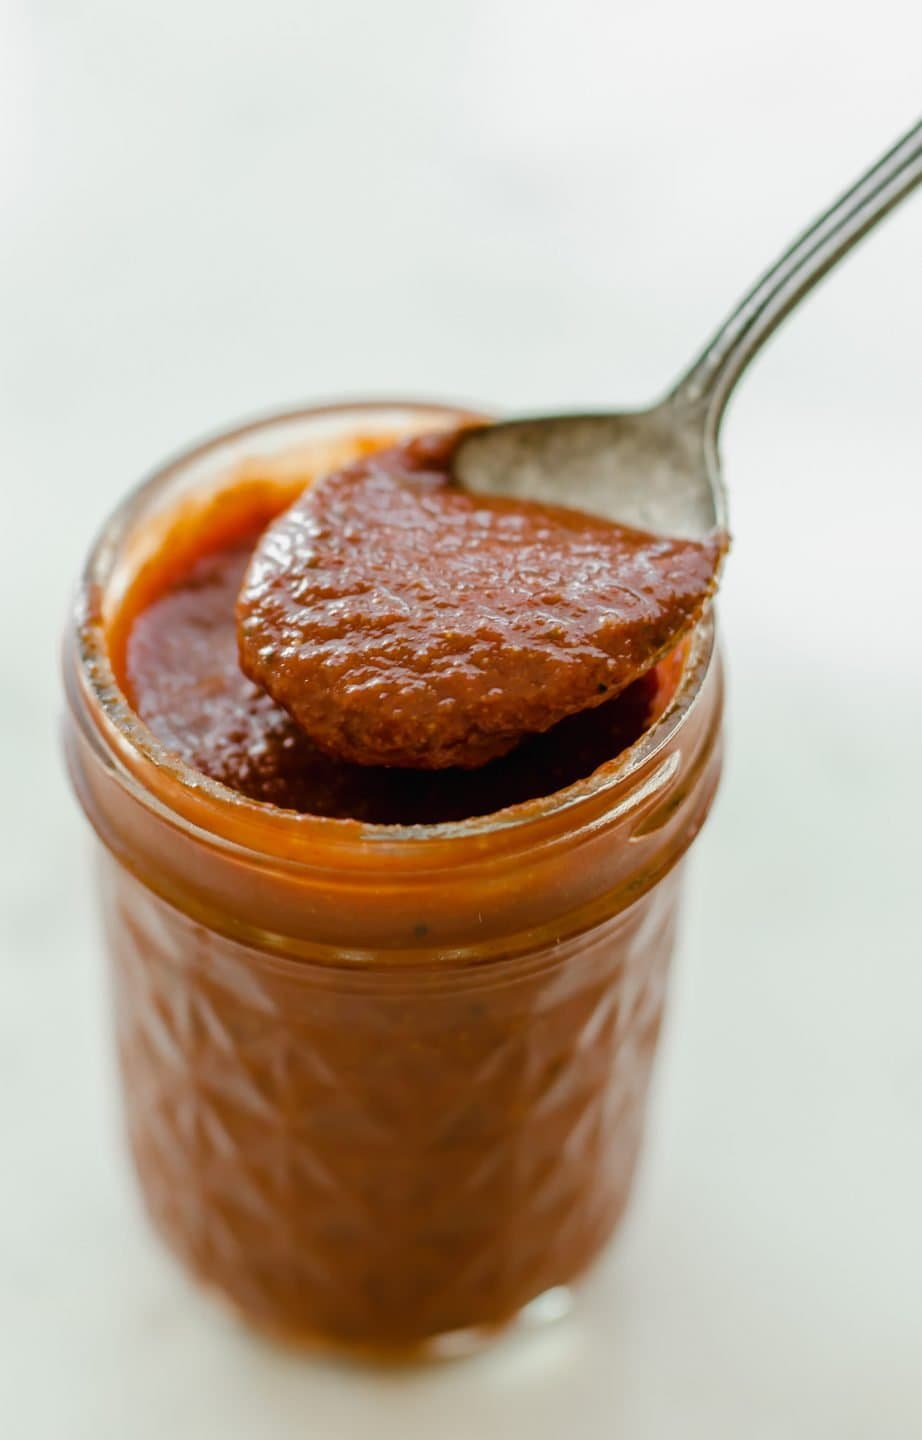 A jar of homemade taco sauce with a spoon lifting some out of the jar.